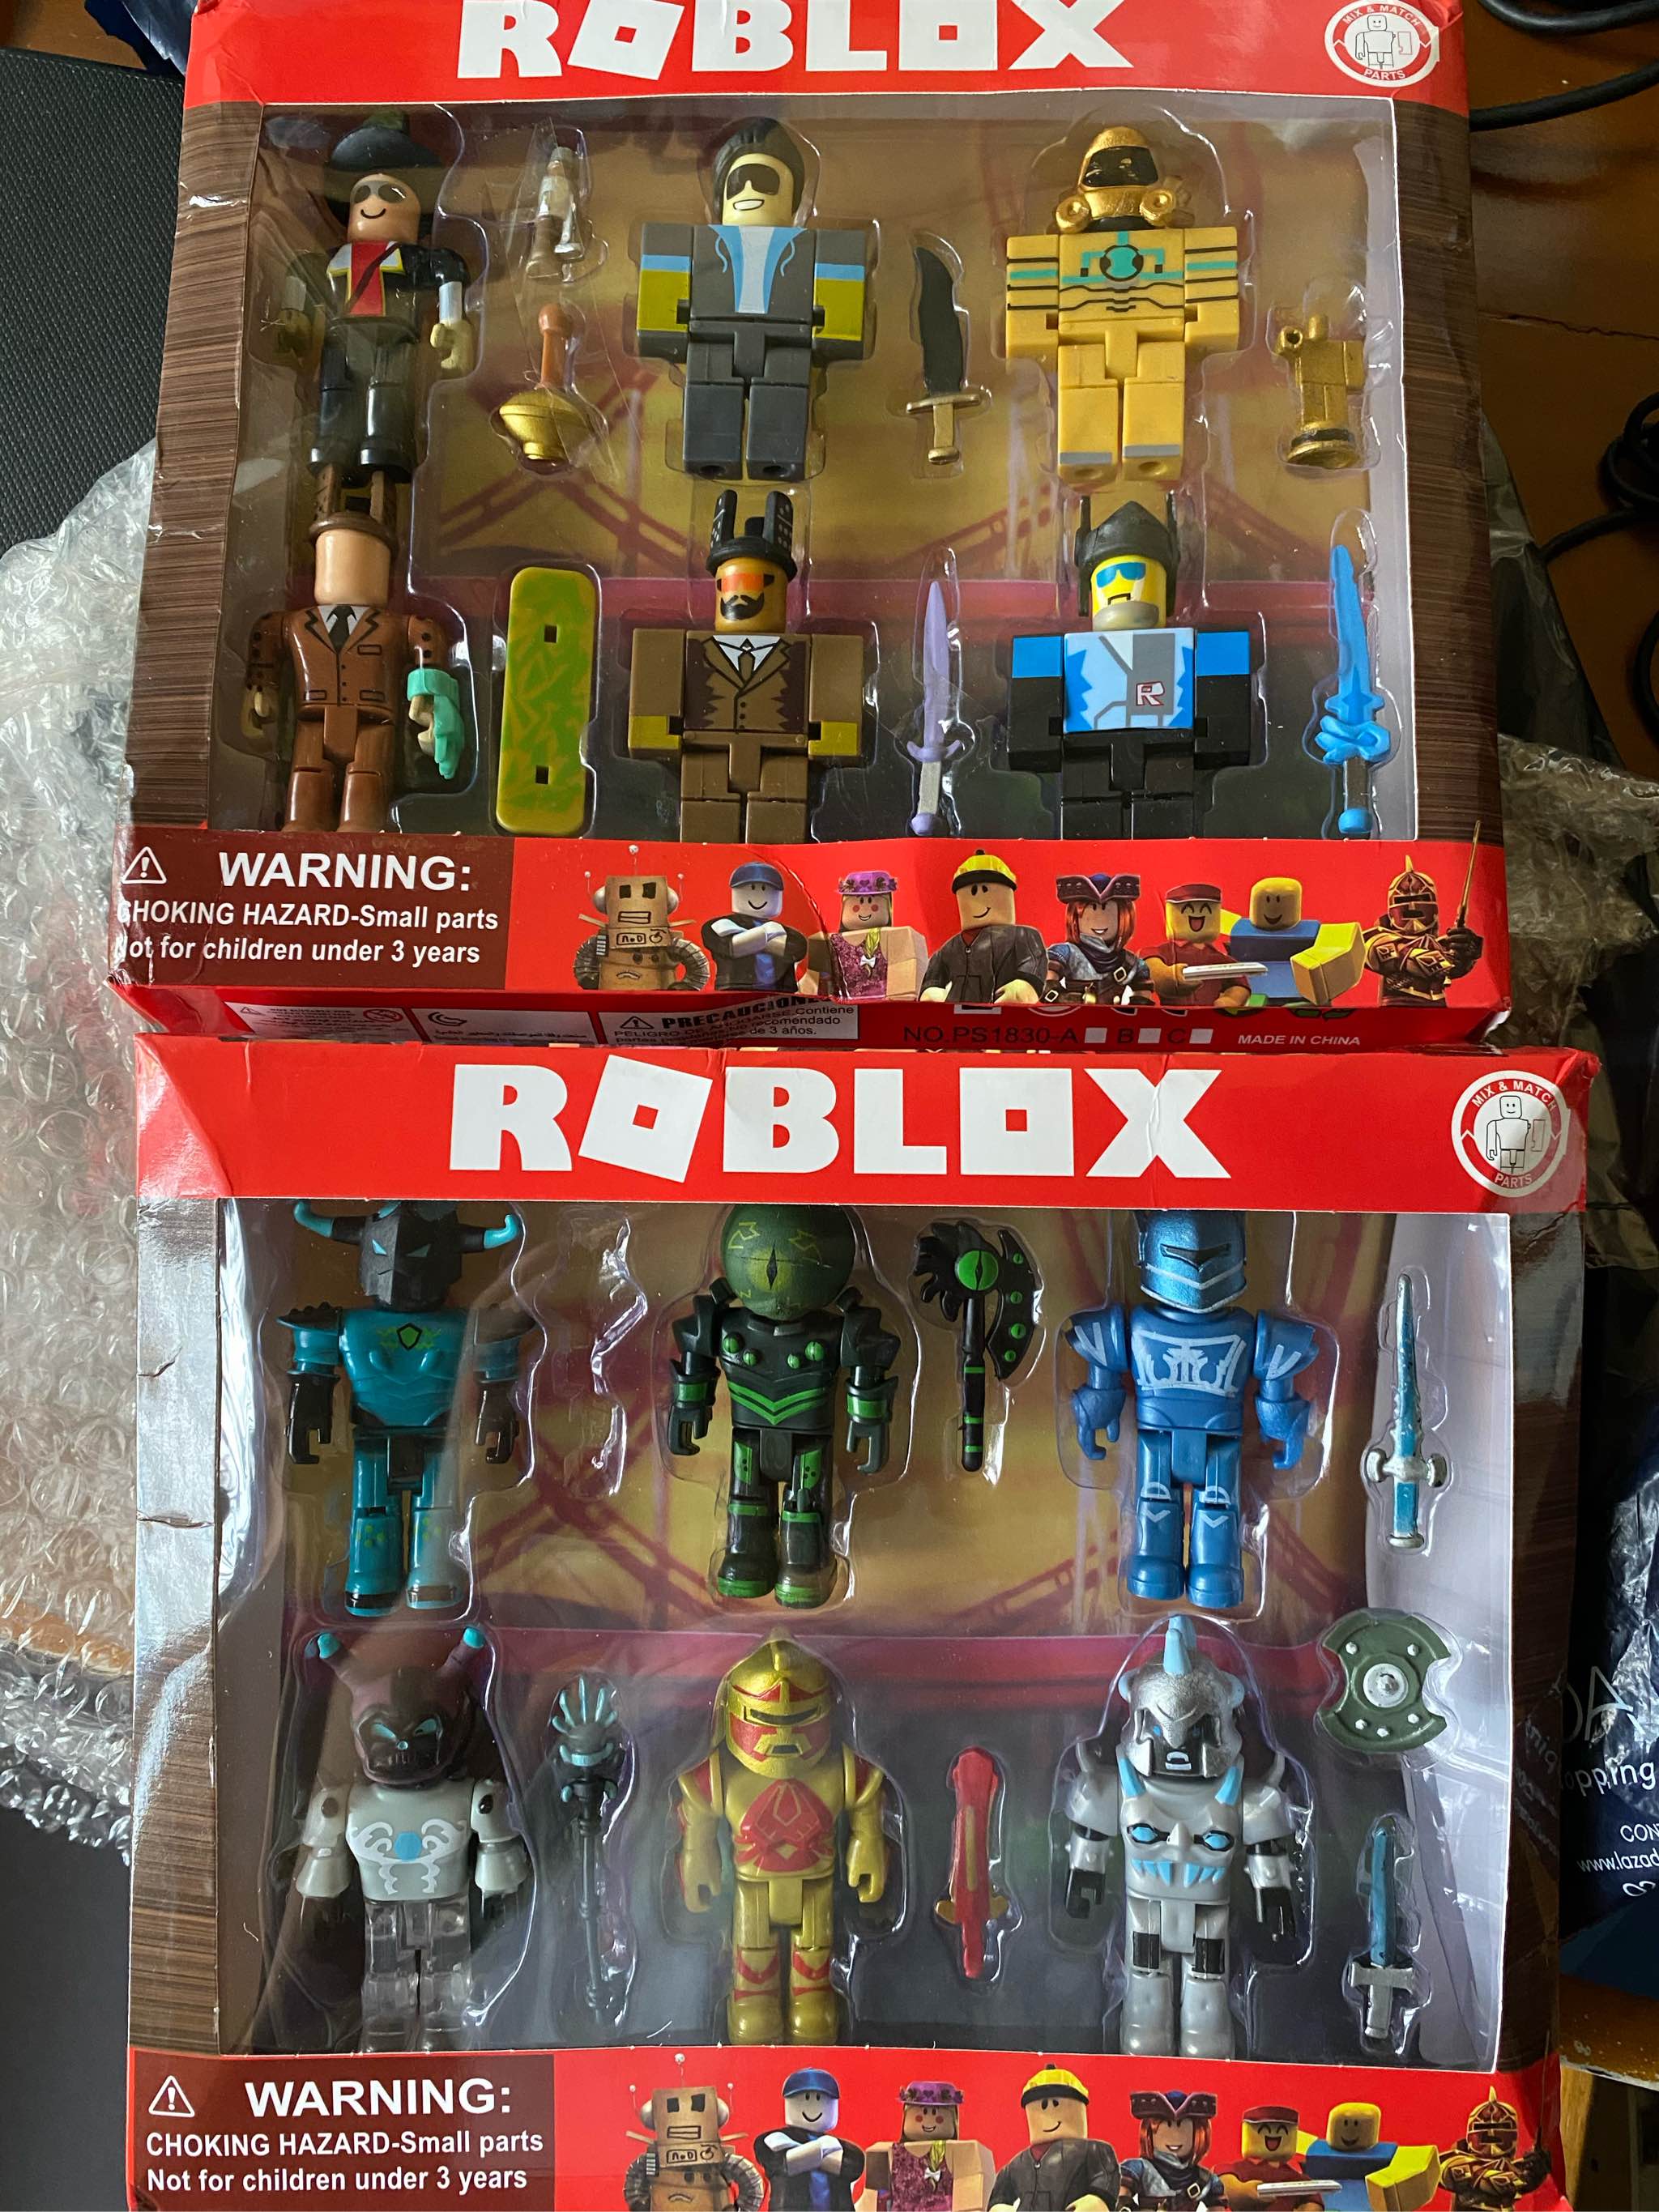 Birthday Gift Roblox Toys For Boys Legends Of Roblox Toys Figures Full Set No Code And Neverland Lagoon Set Lazada Ph - lazada roblox toys